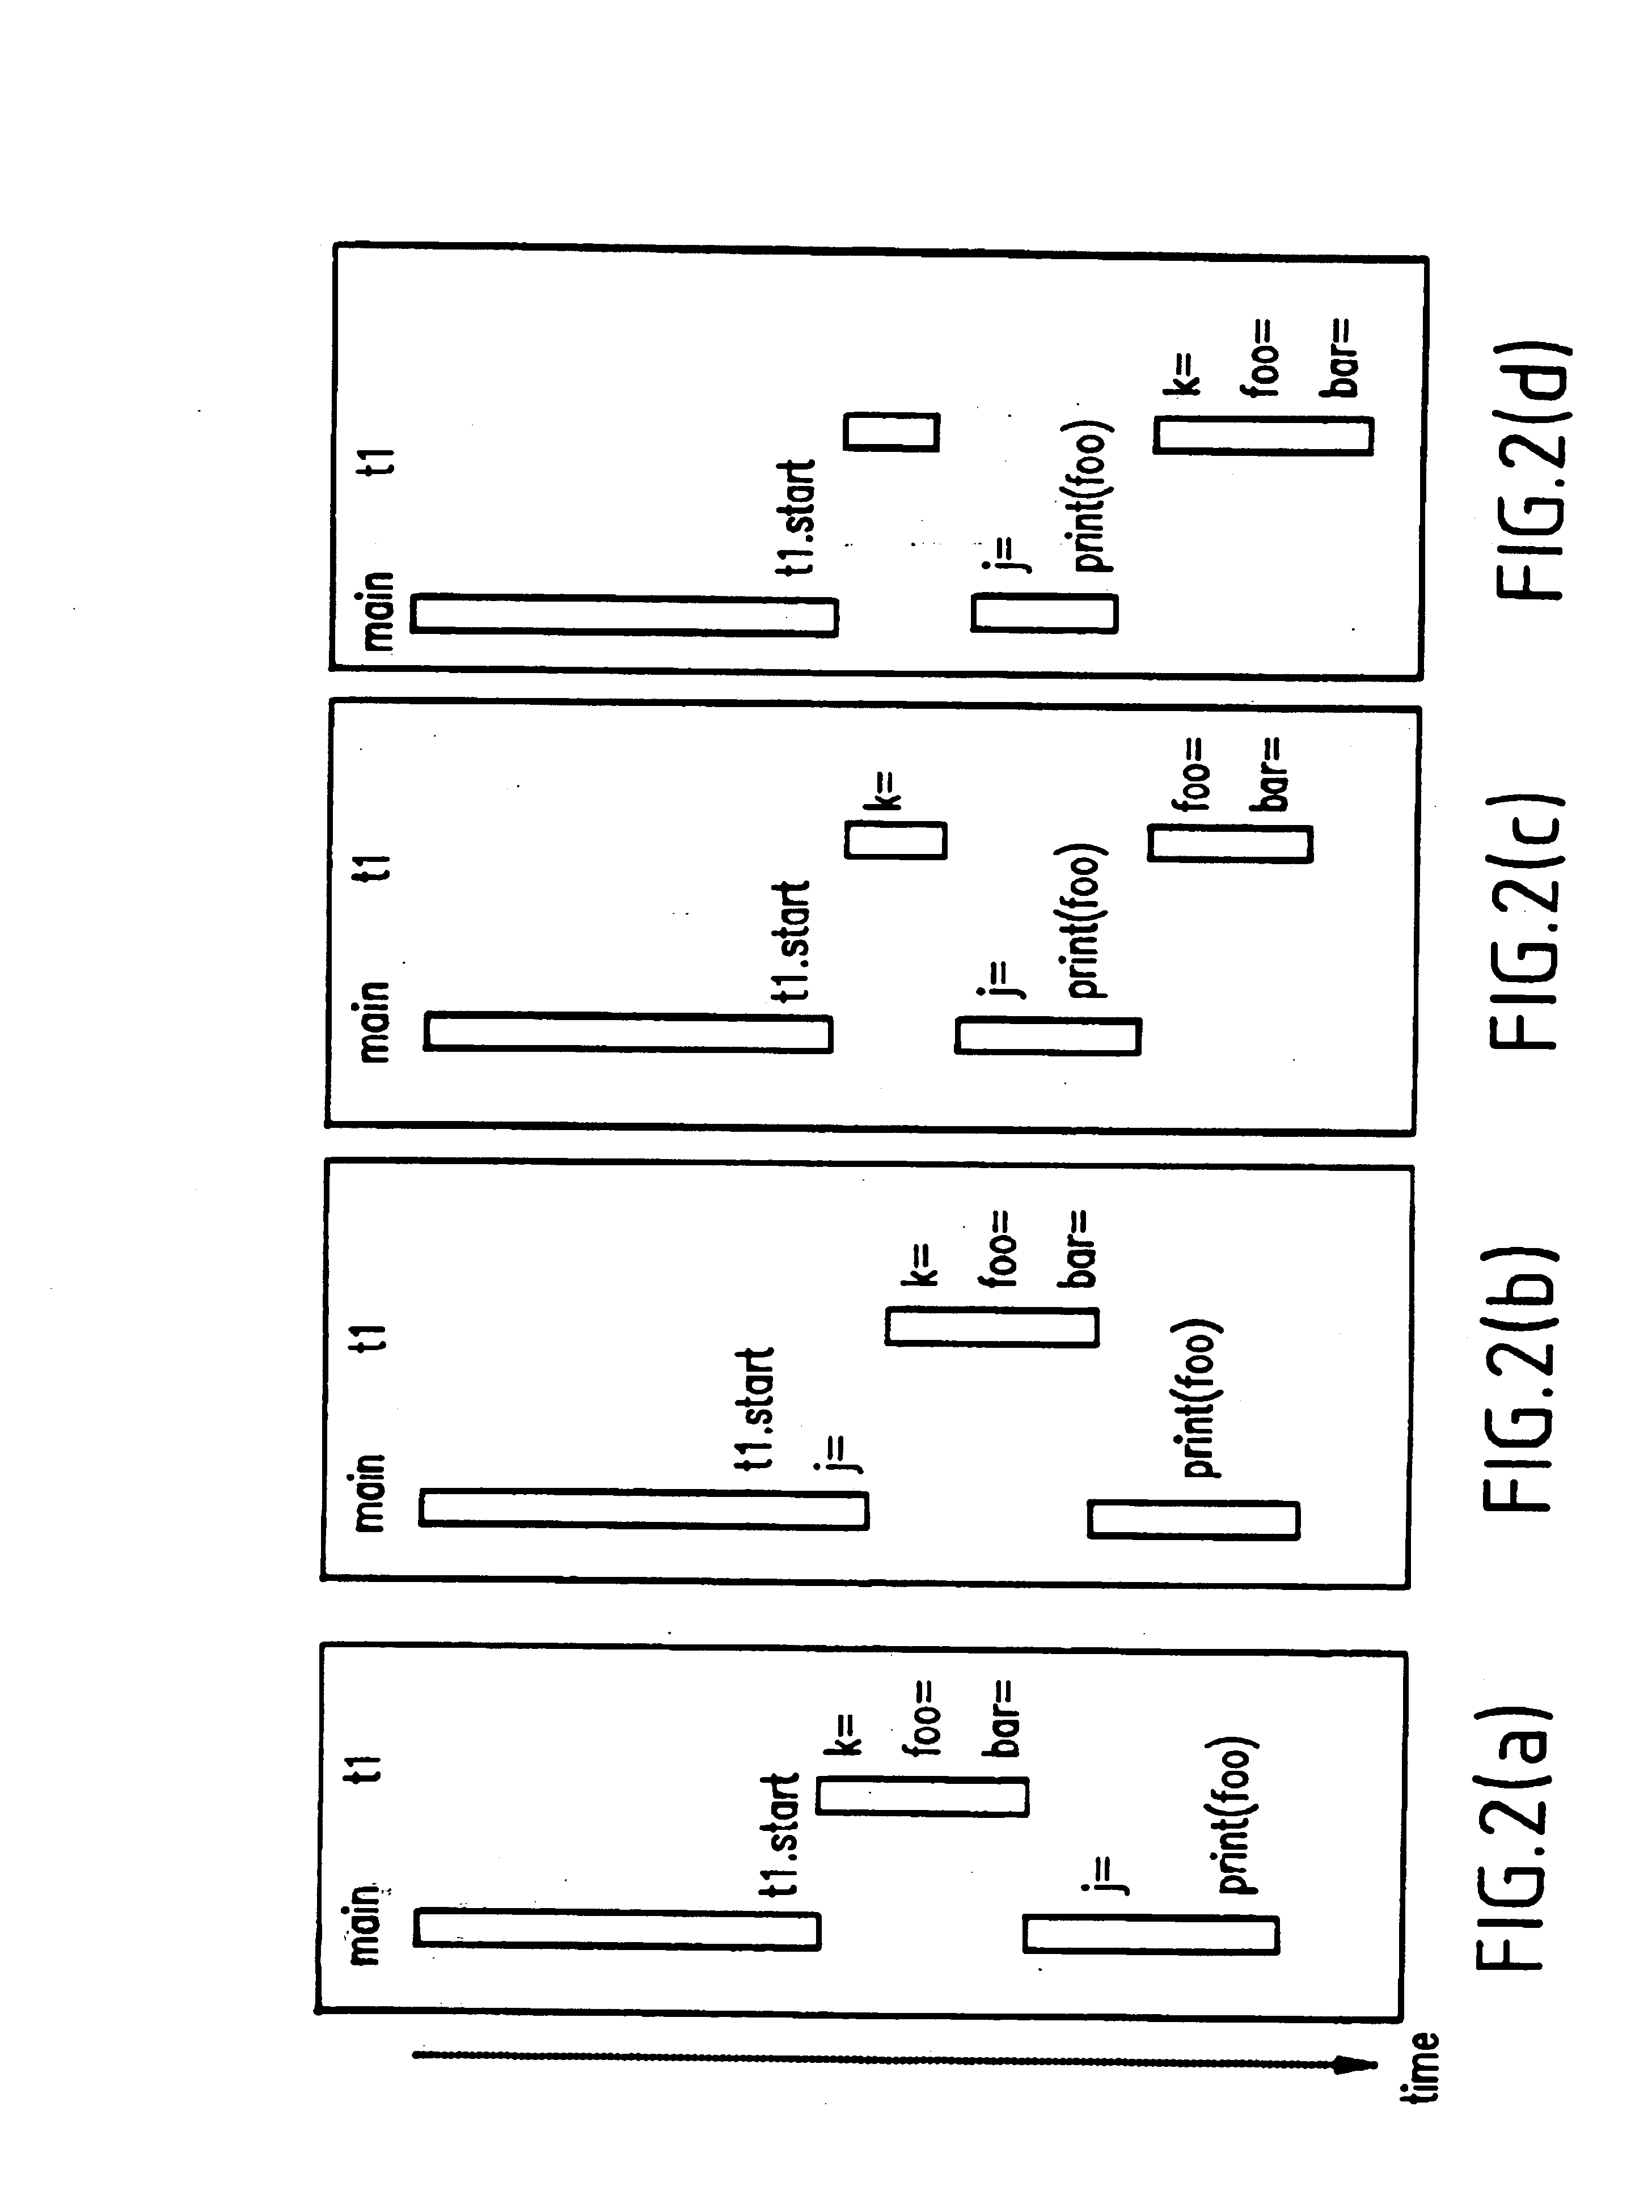 Method and system for recording and replaying the execution of distributed java programs